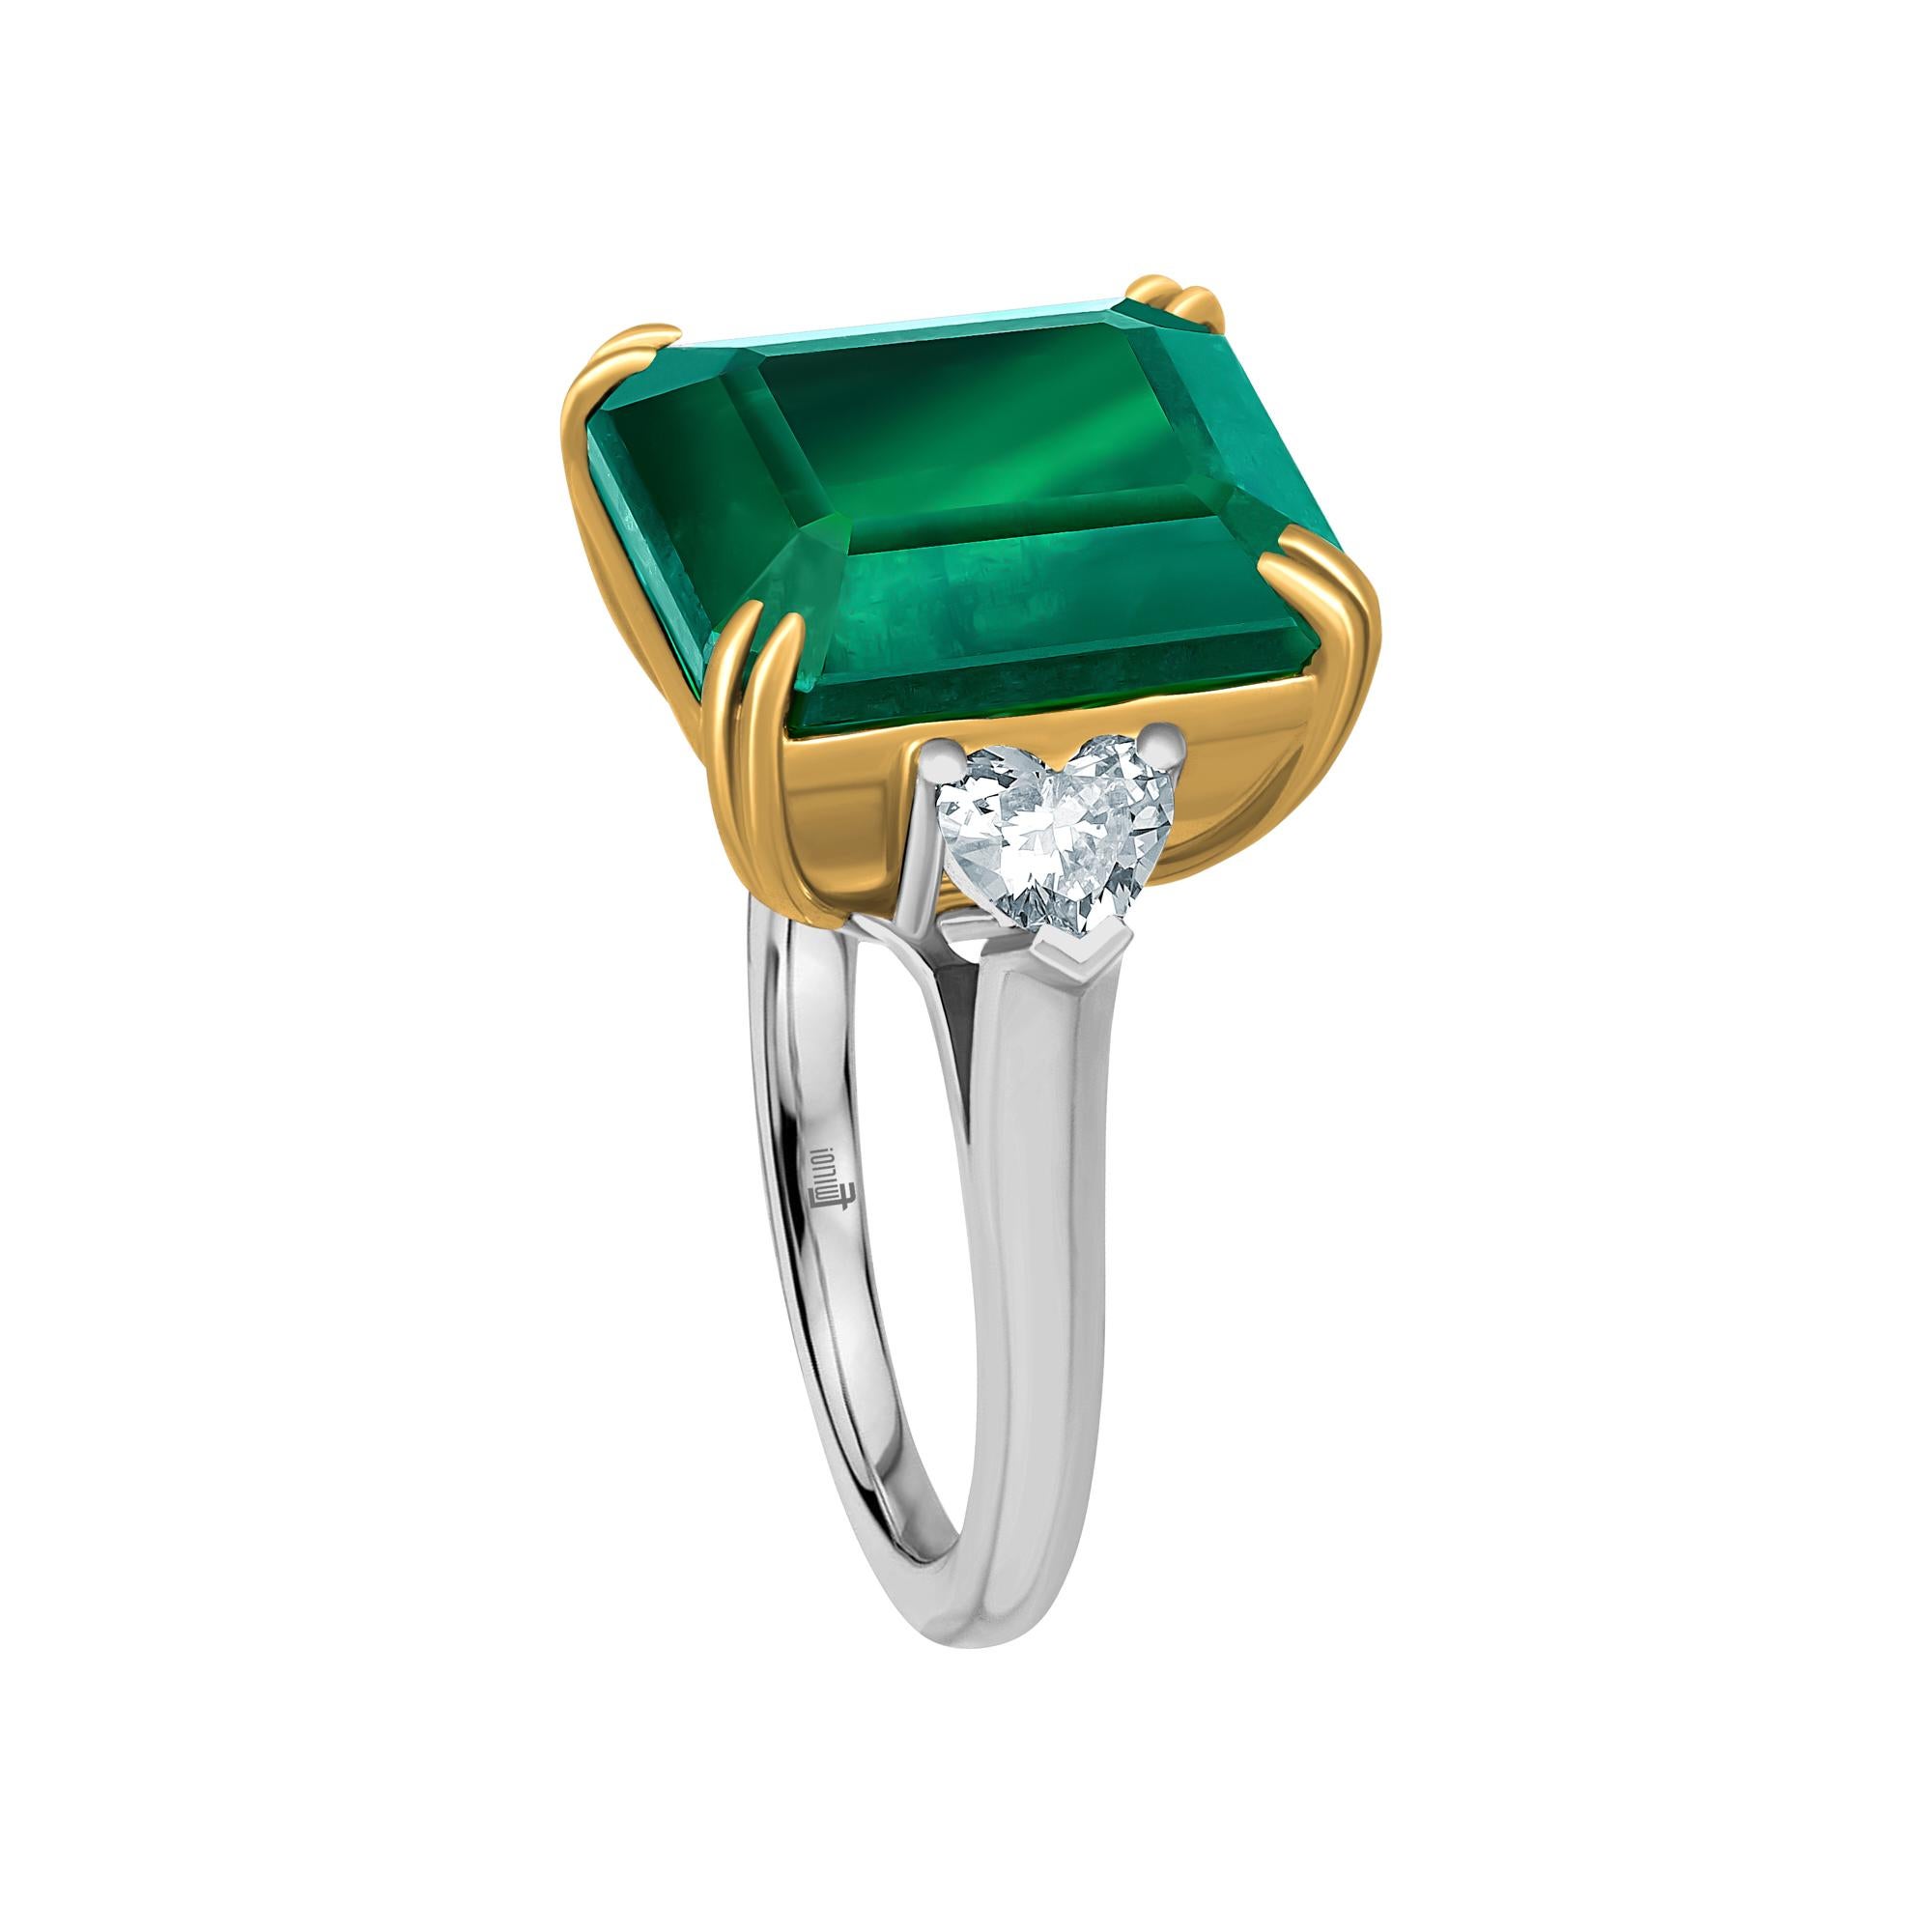 Showcasing a gorgeous Emerald cut Genuine Emerald Certified by C.Dunaigre. The emerald color is certified as Vivid green, the most desirable color in emeralds. The origin is certified as Zambian. Based on emerald grading methodology the clarity of